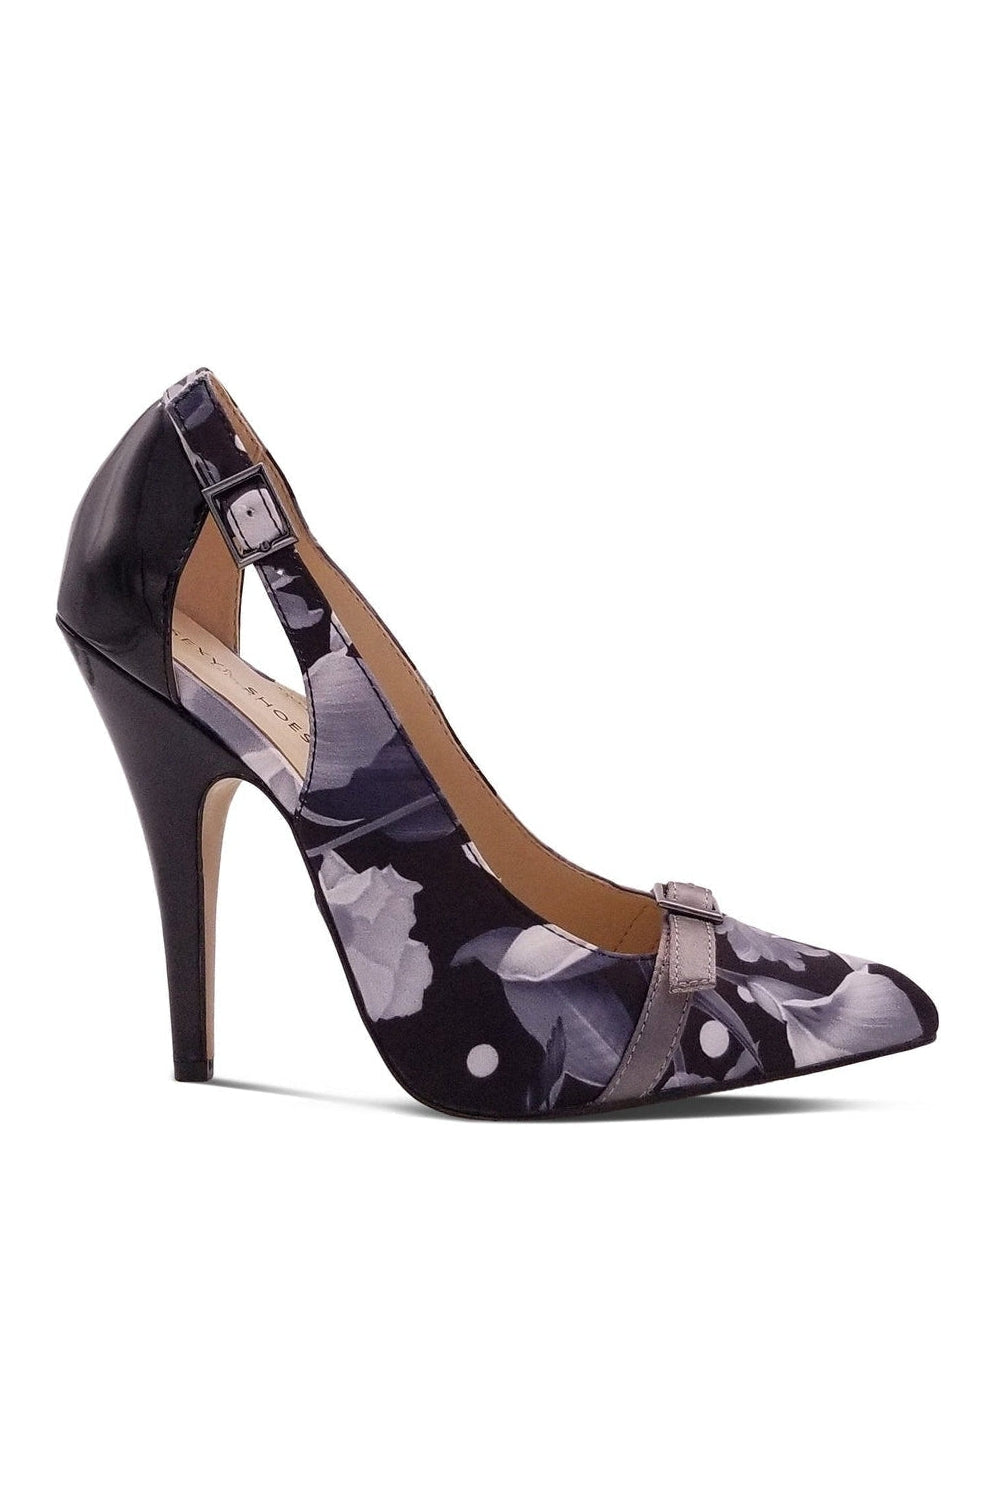 Flirty Floral Printed Pump with Buckle Detail-Pumps-Sexyshoes Signature-Black-SEXYSHOES.COM